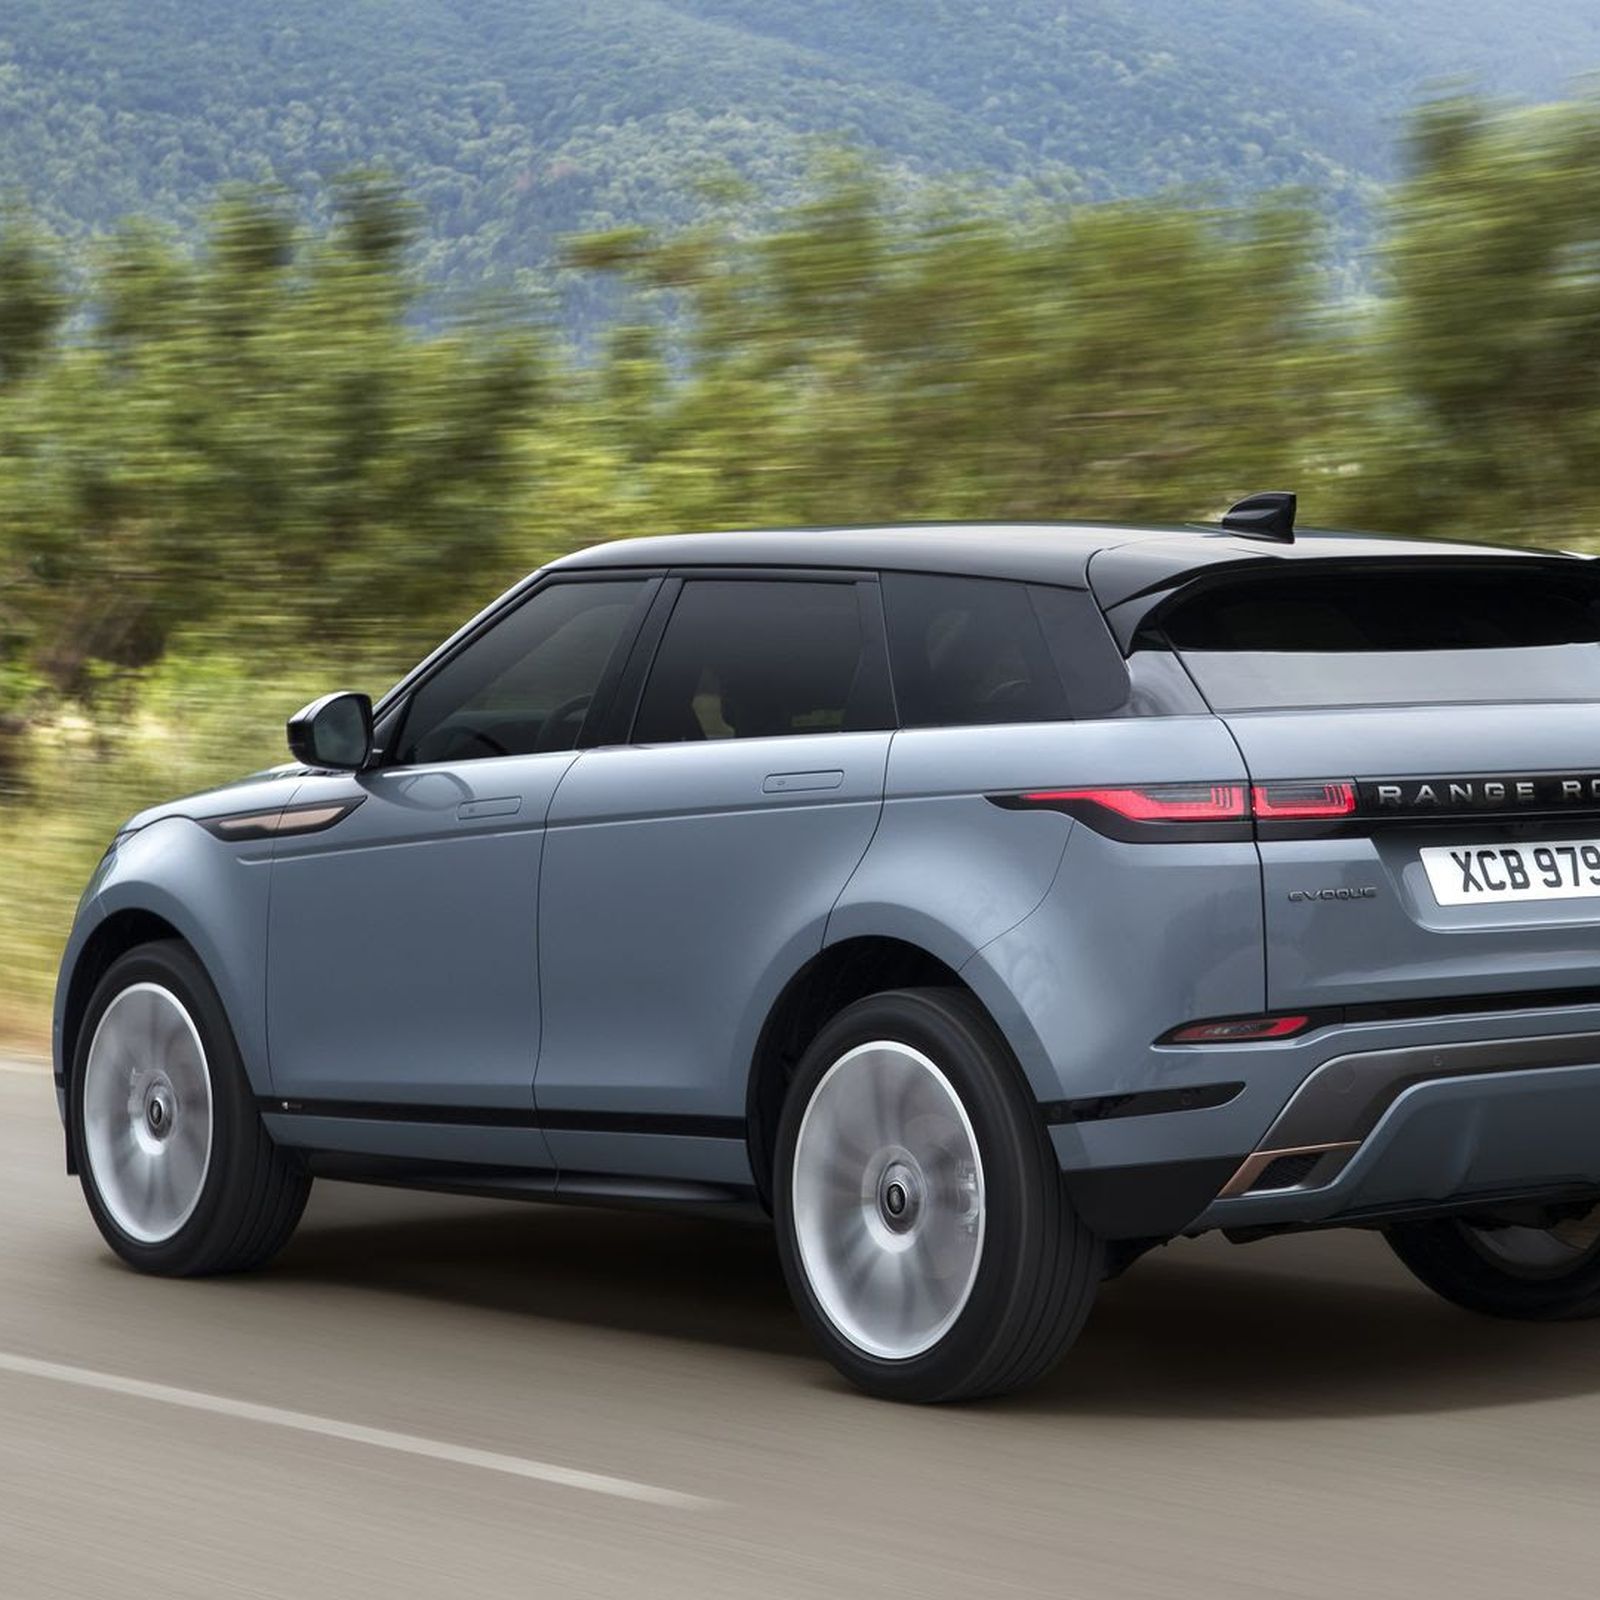 What we're driving: 2020 Range Rover Evoque